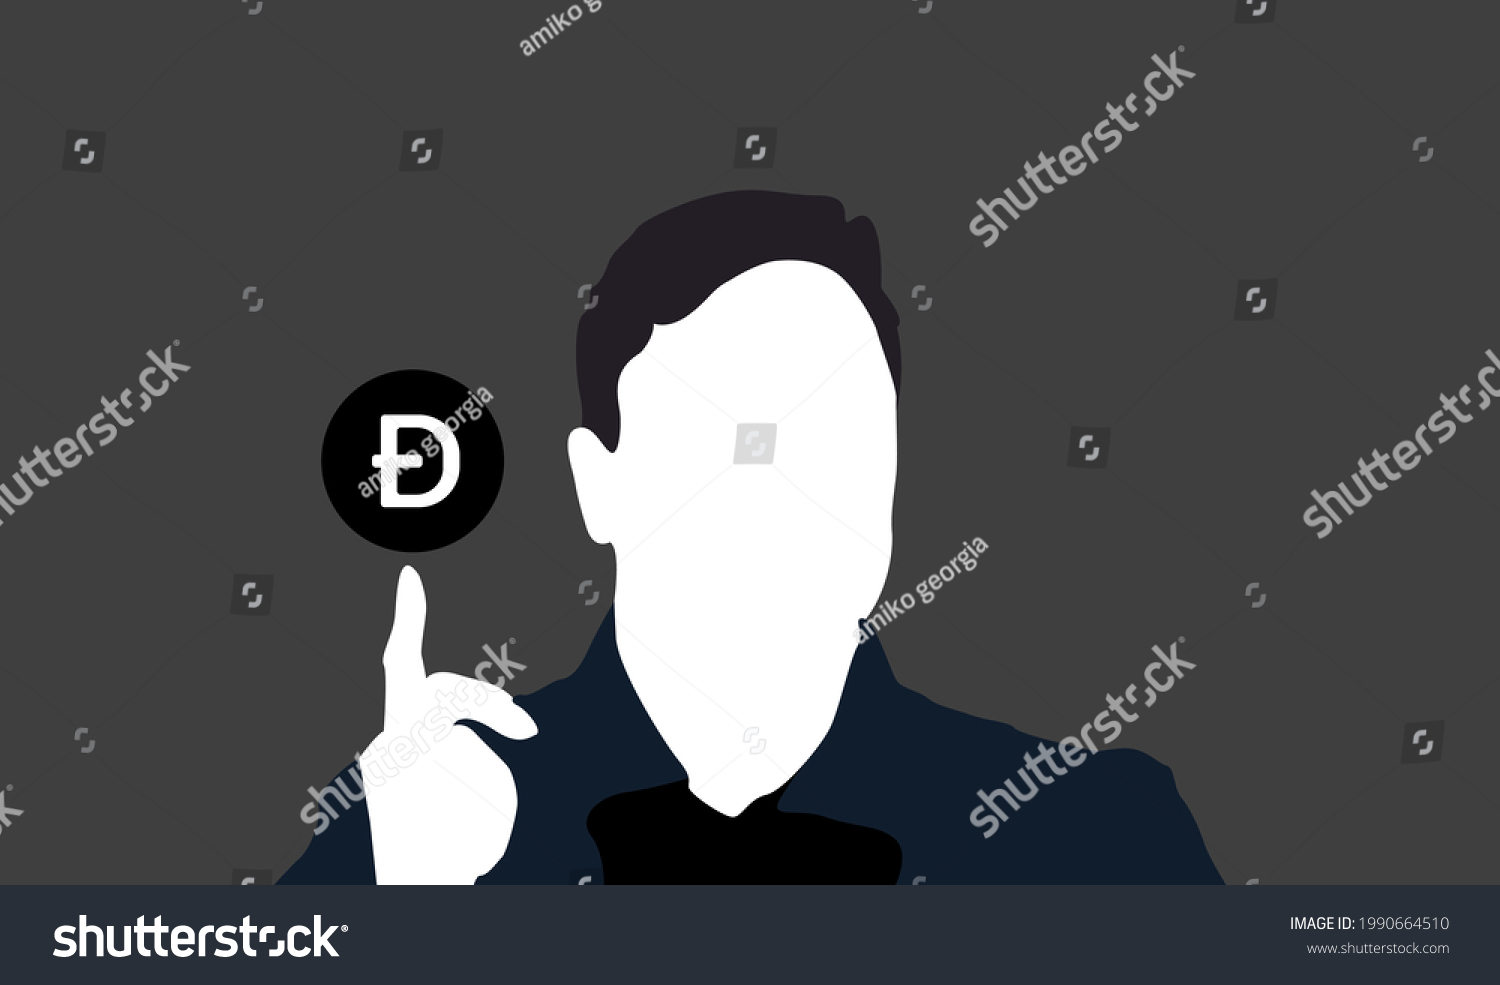 SVG of Elon Musk and Dogecoin, an illustration of the Dogecoin offer on a black background. svg